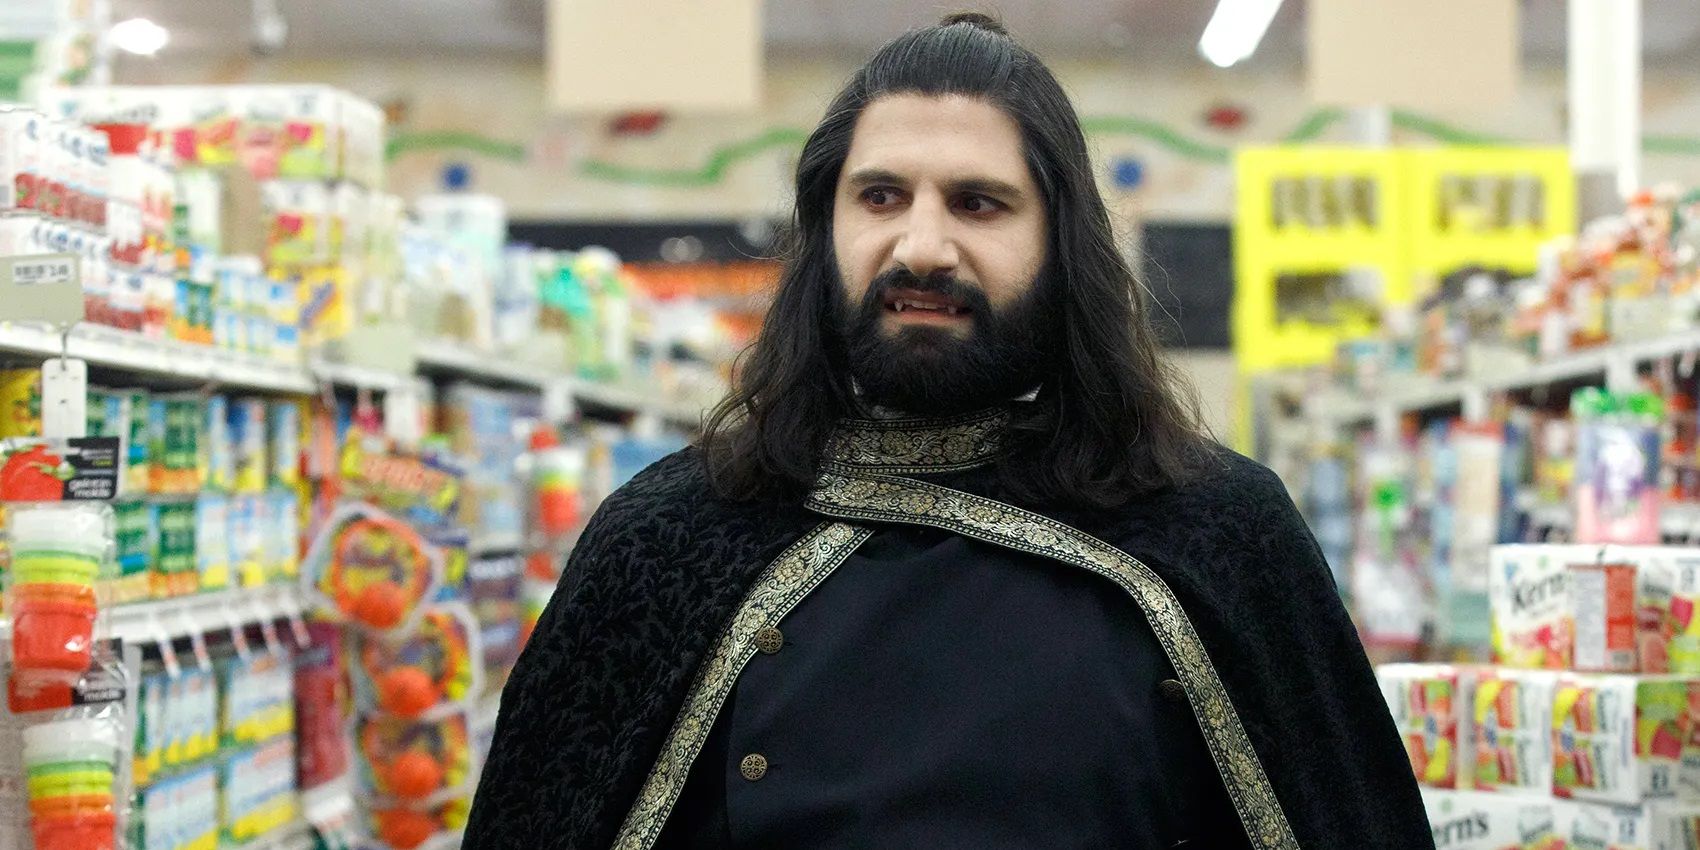 Nandor in a grocery store in What We Do in the Shadows wearing a cloak